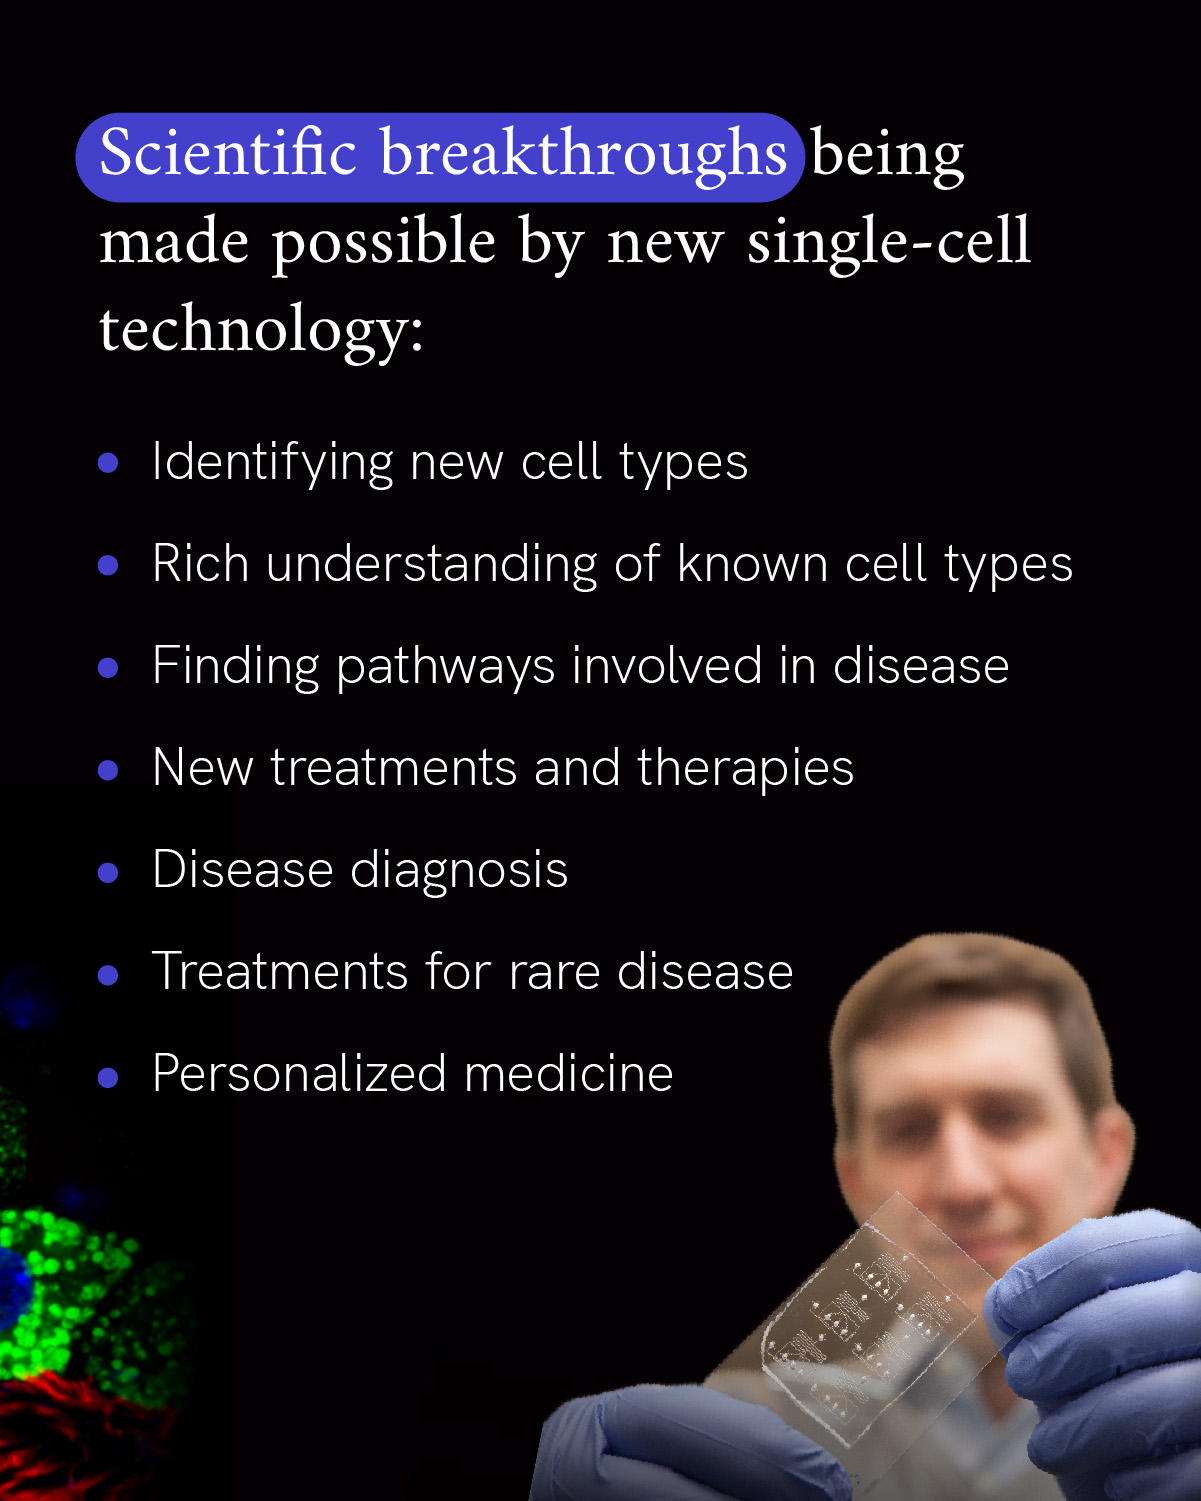 Infographic reads “Scientific breakthroughs being made possible by new single-cell technology,” followed by bullet points that state “Identifying new cell types,” “Rich understanding of known cell types,” “Finding pathways involved in disease,” “New treatments and therapies,” “Disease diagnosis,” “Treatments for rare disease,” and “Personalized medicine.” An out-of-focus photo of a researcher wearing latex gloves holding and looking at a microscope slide accompanies the text.